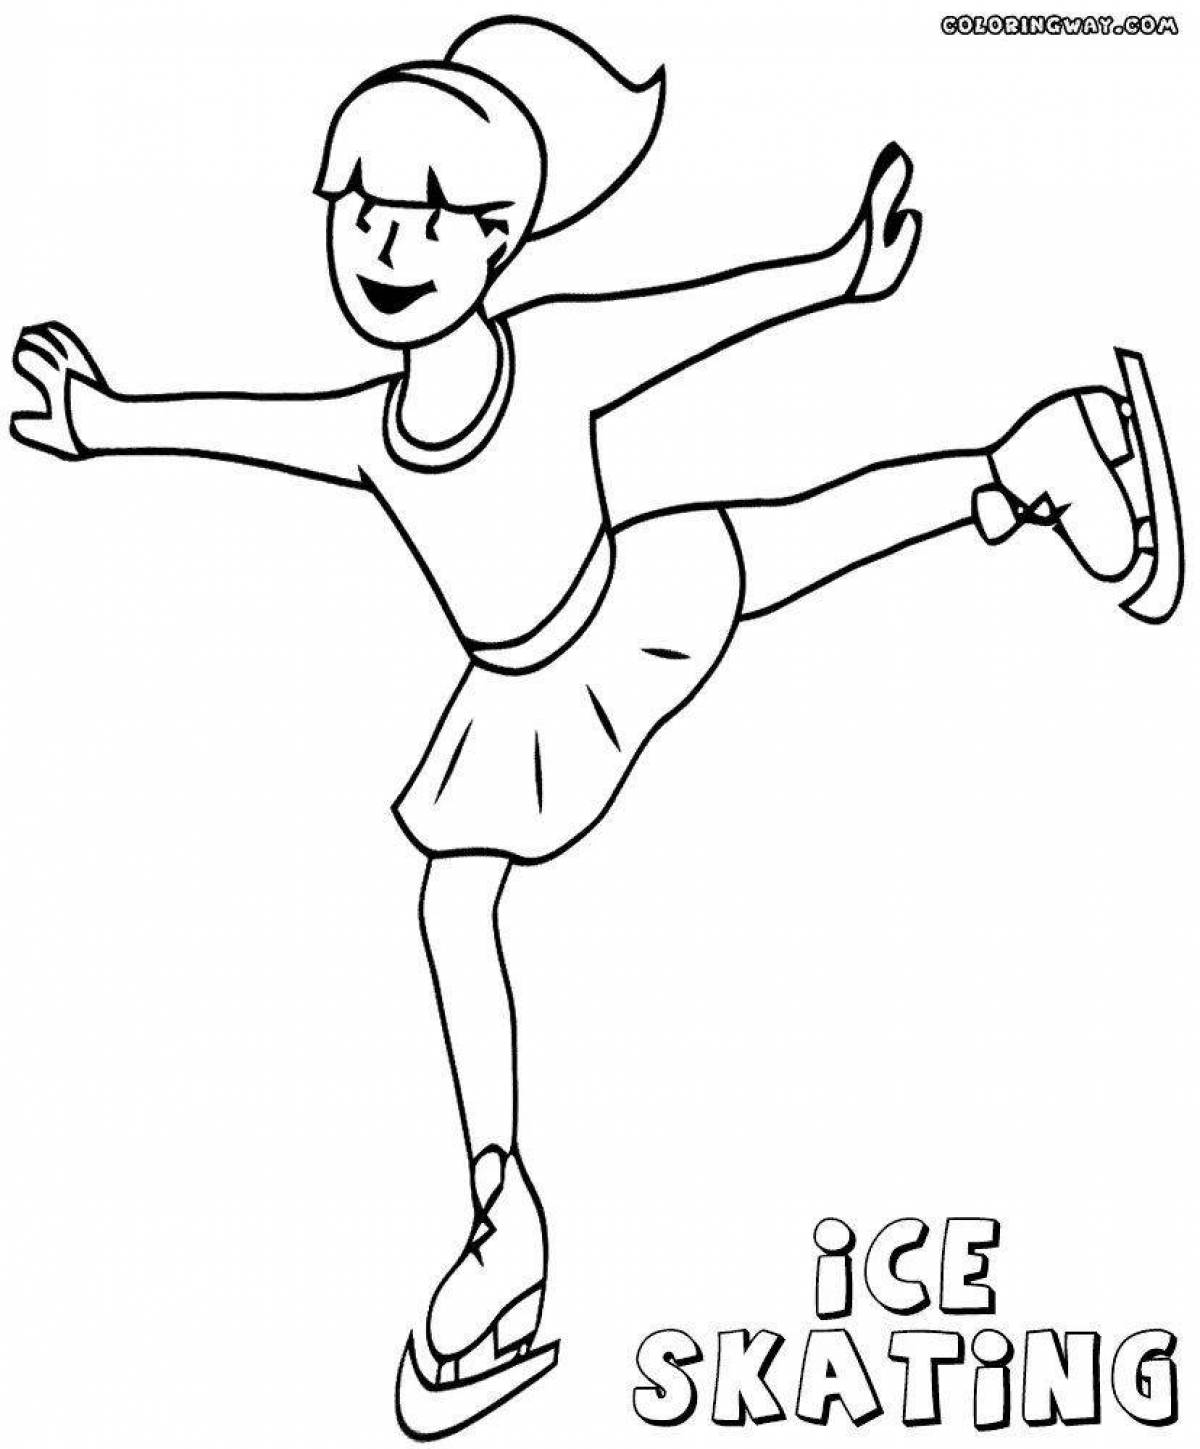 Amazing figure skater coloring book for kids